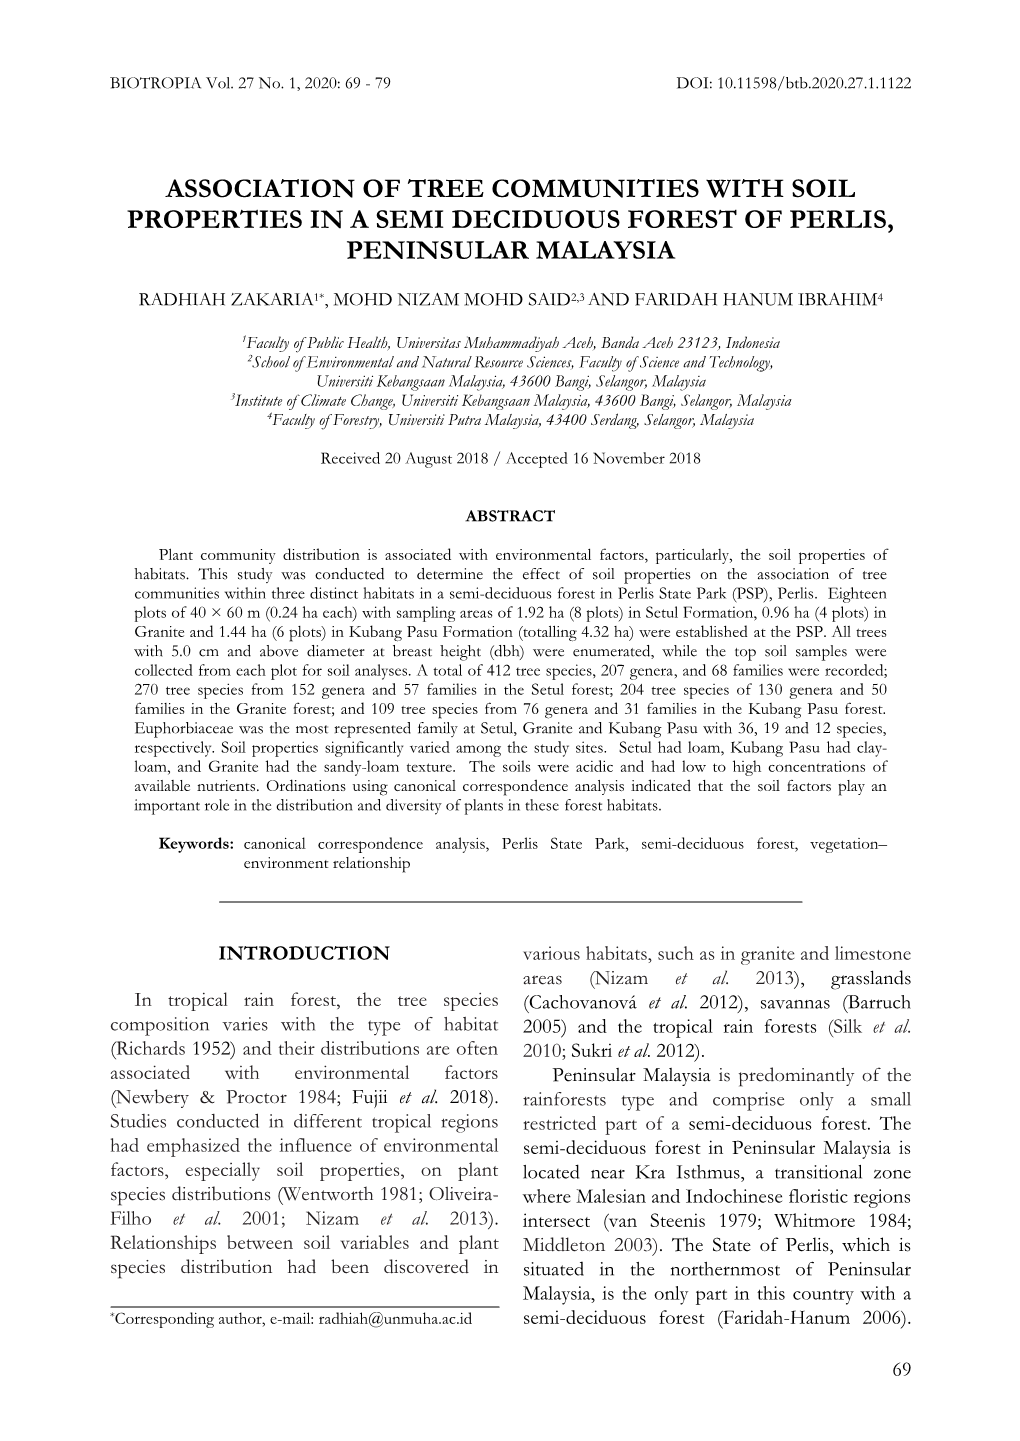 Association of Tree Communities with Soil Properties in a Semi Deciduous Forest of Perlis, Peninsular Malaysia